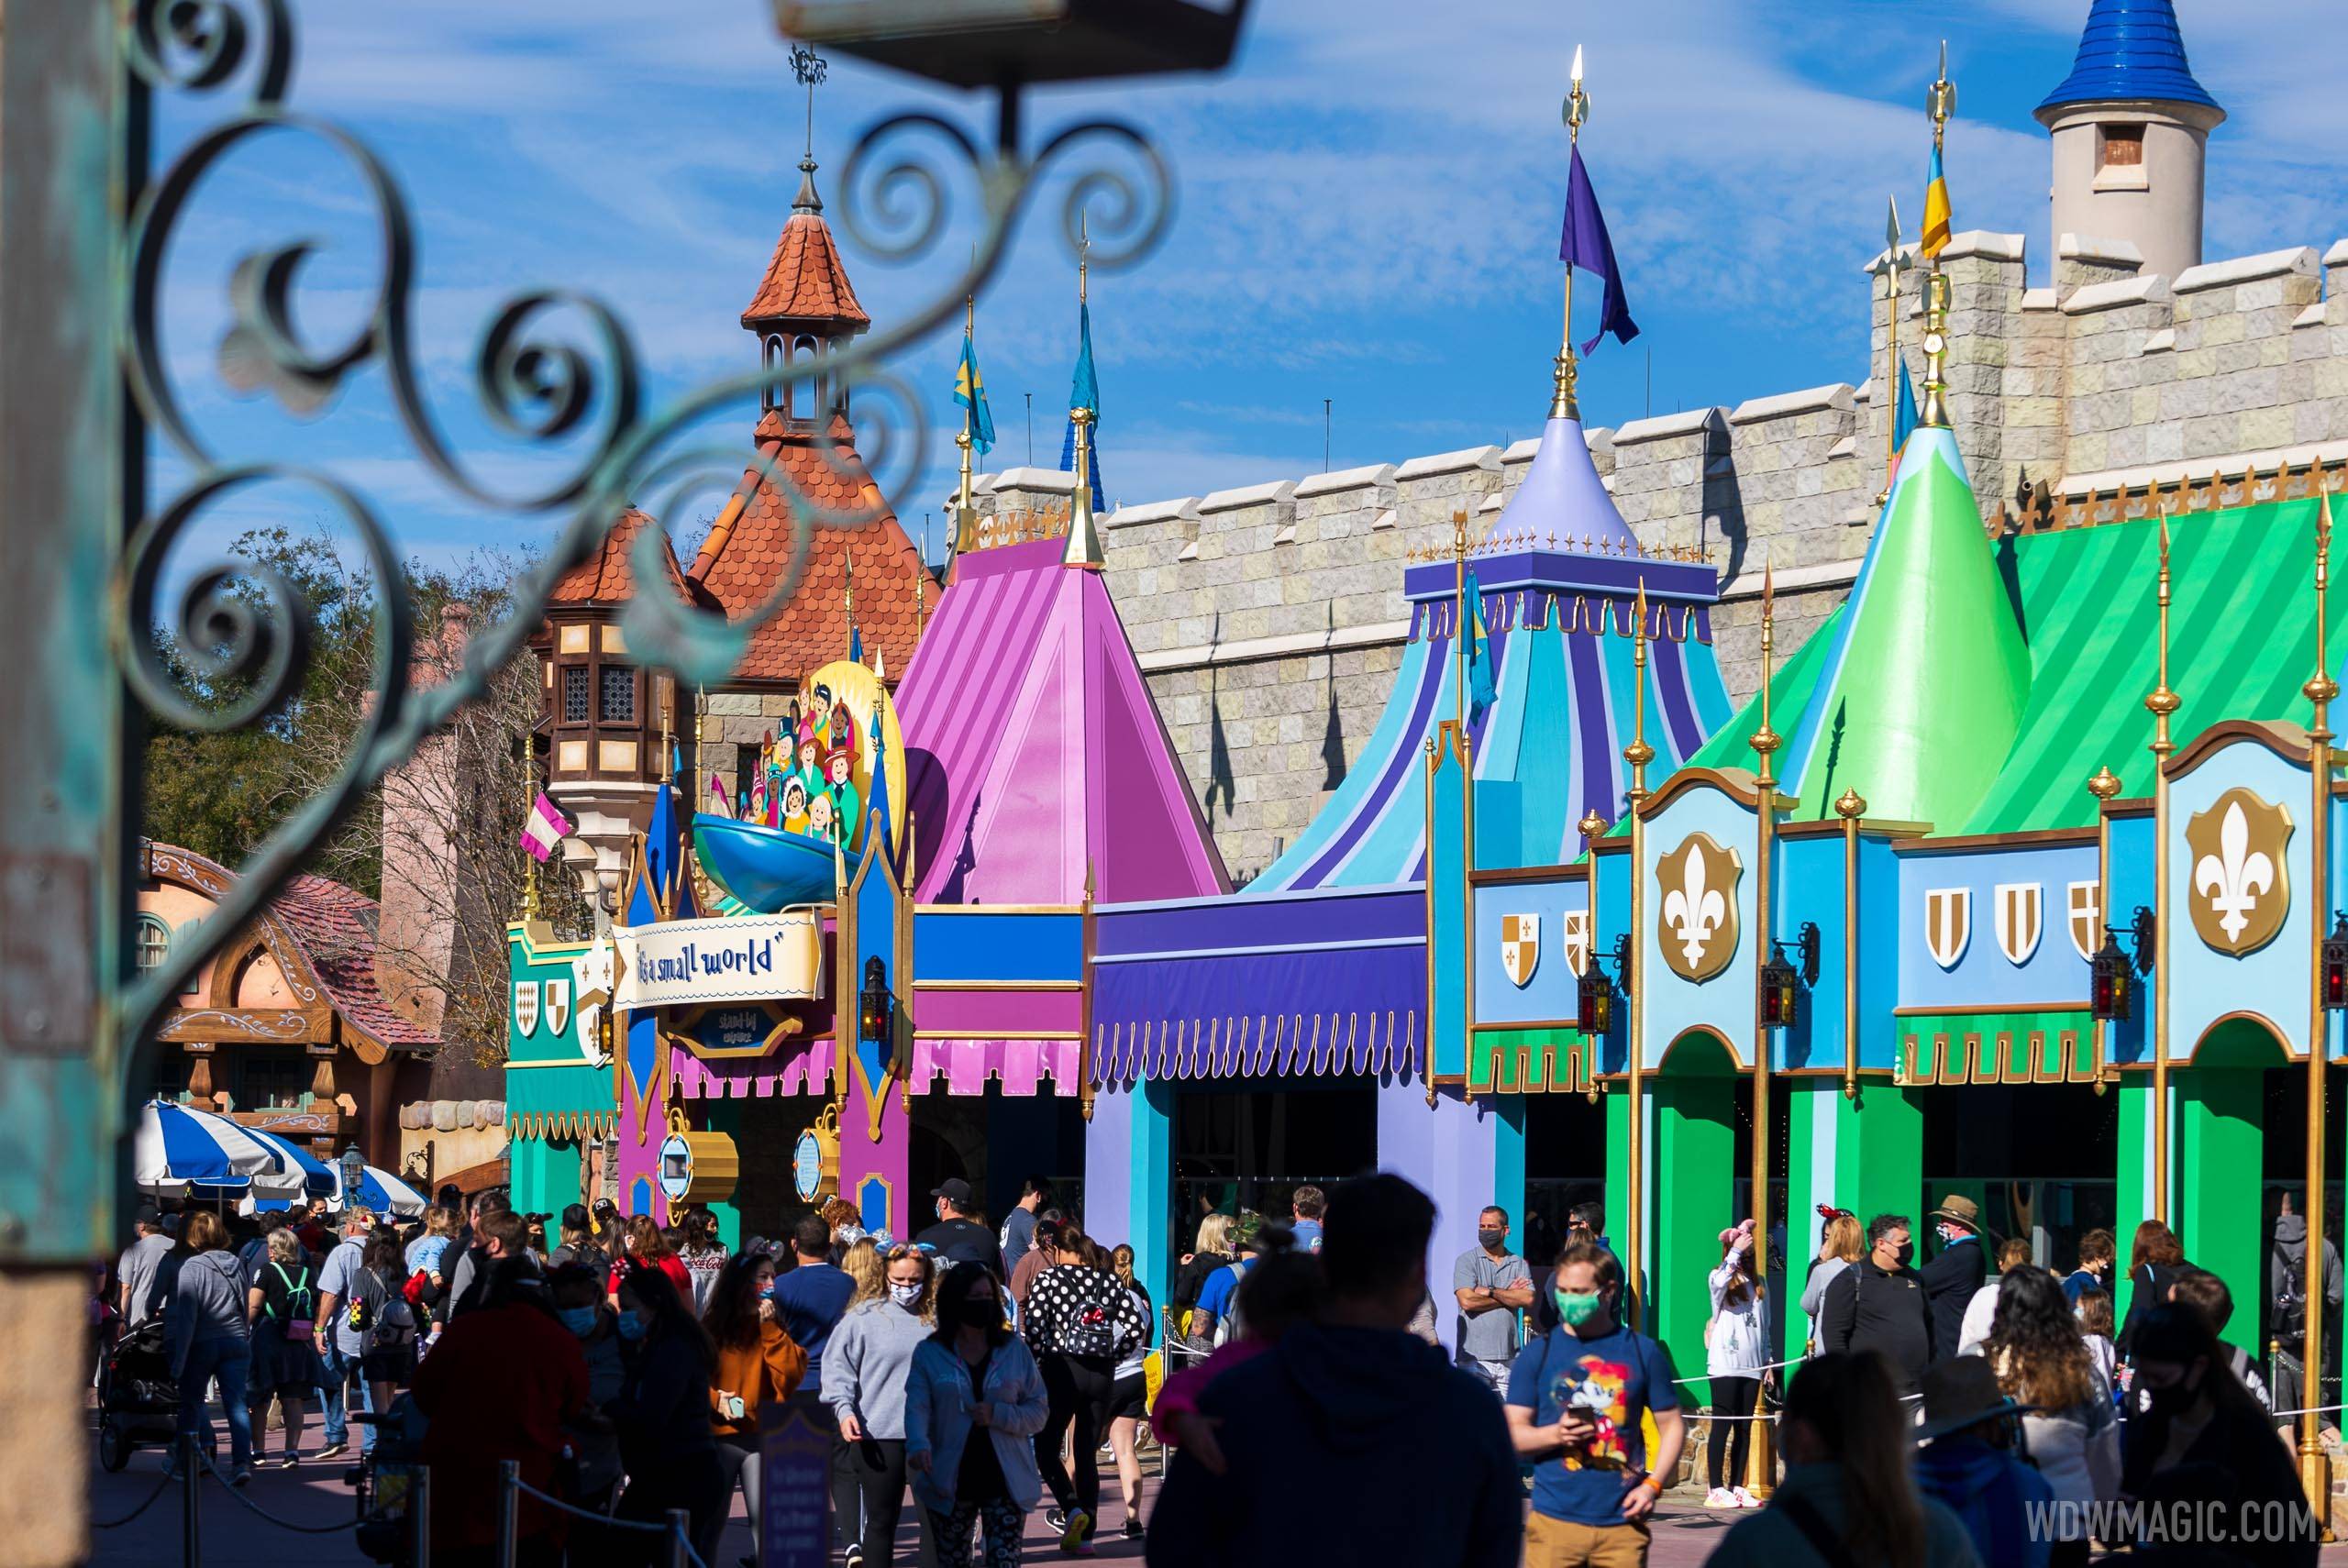 it's a small world exterior refurbishment completed - January 2021